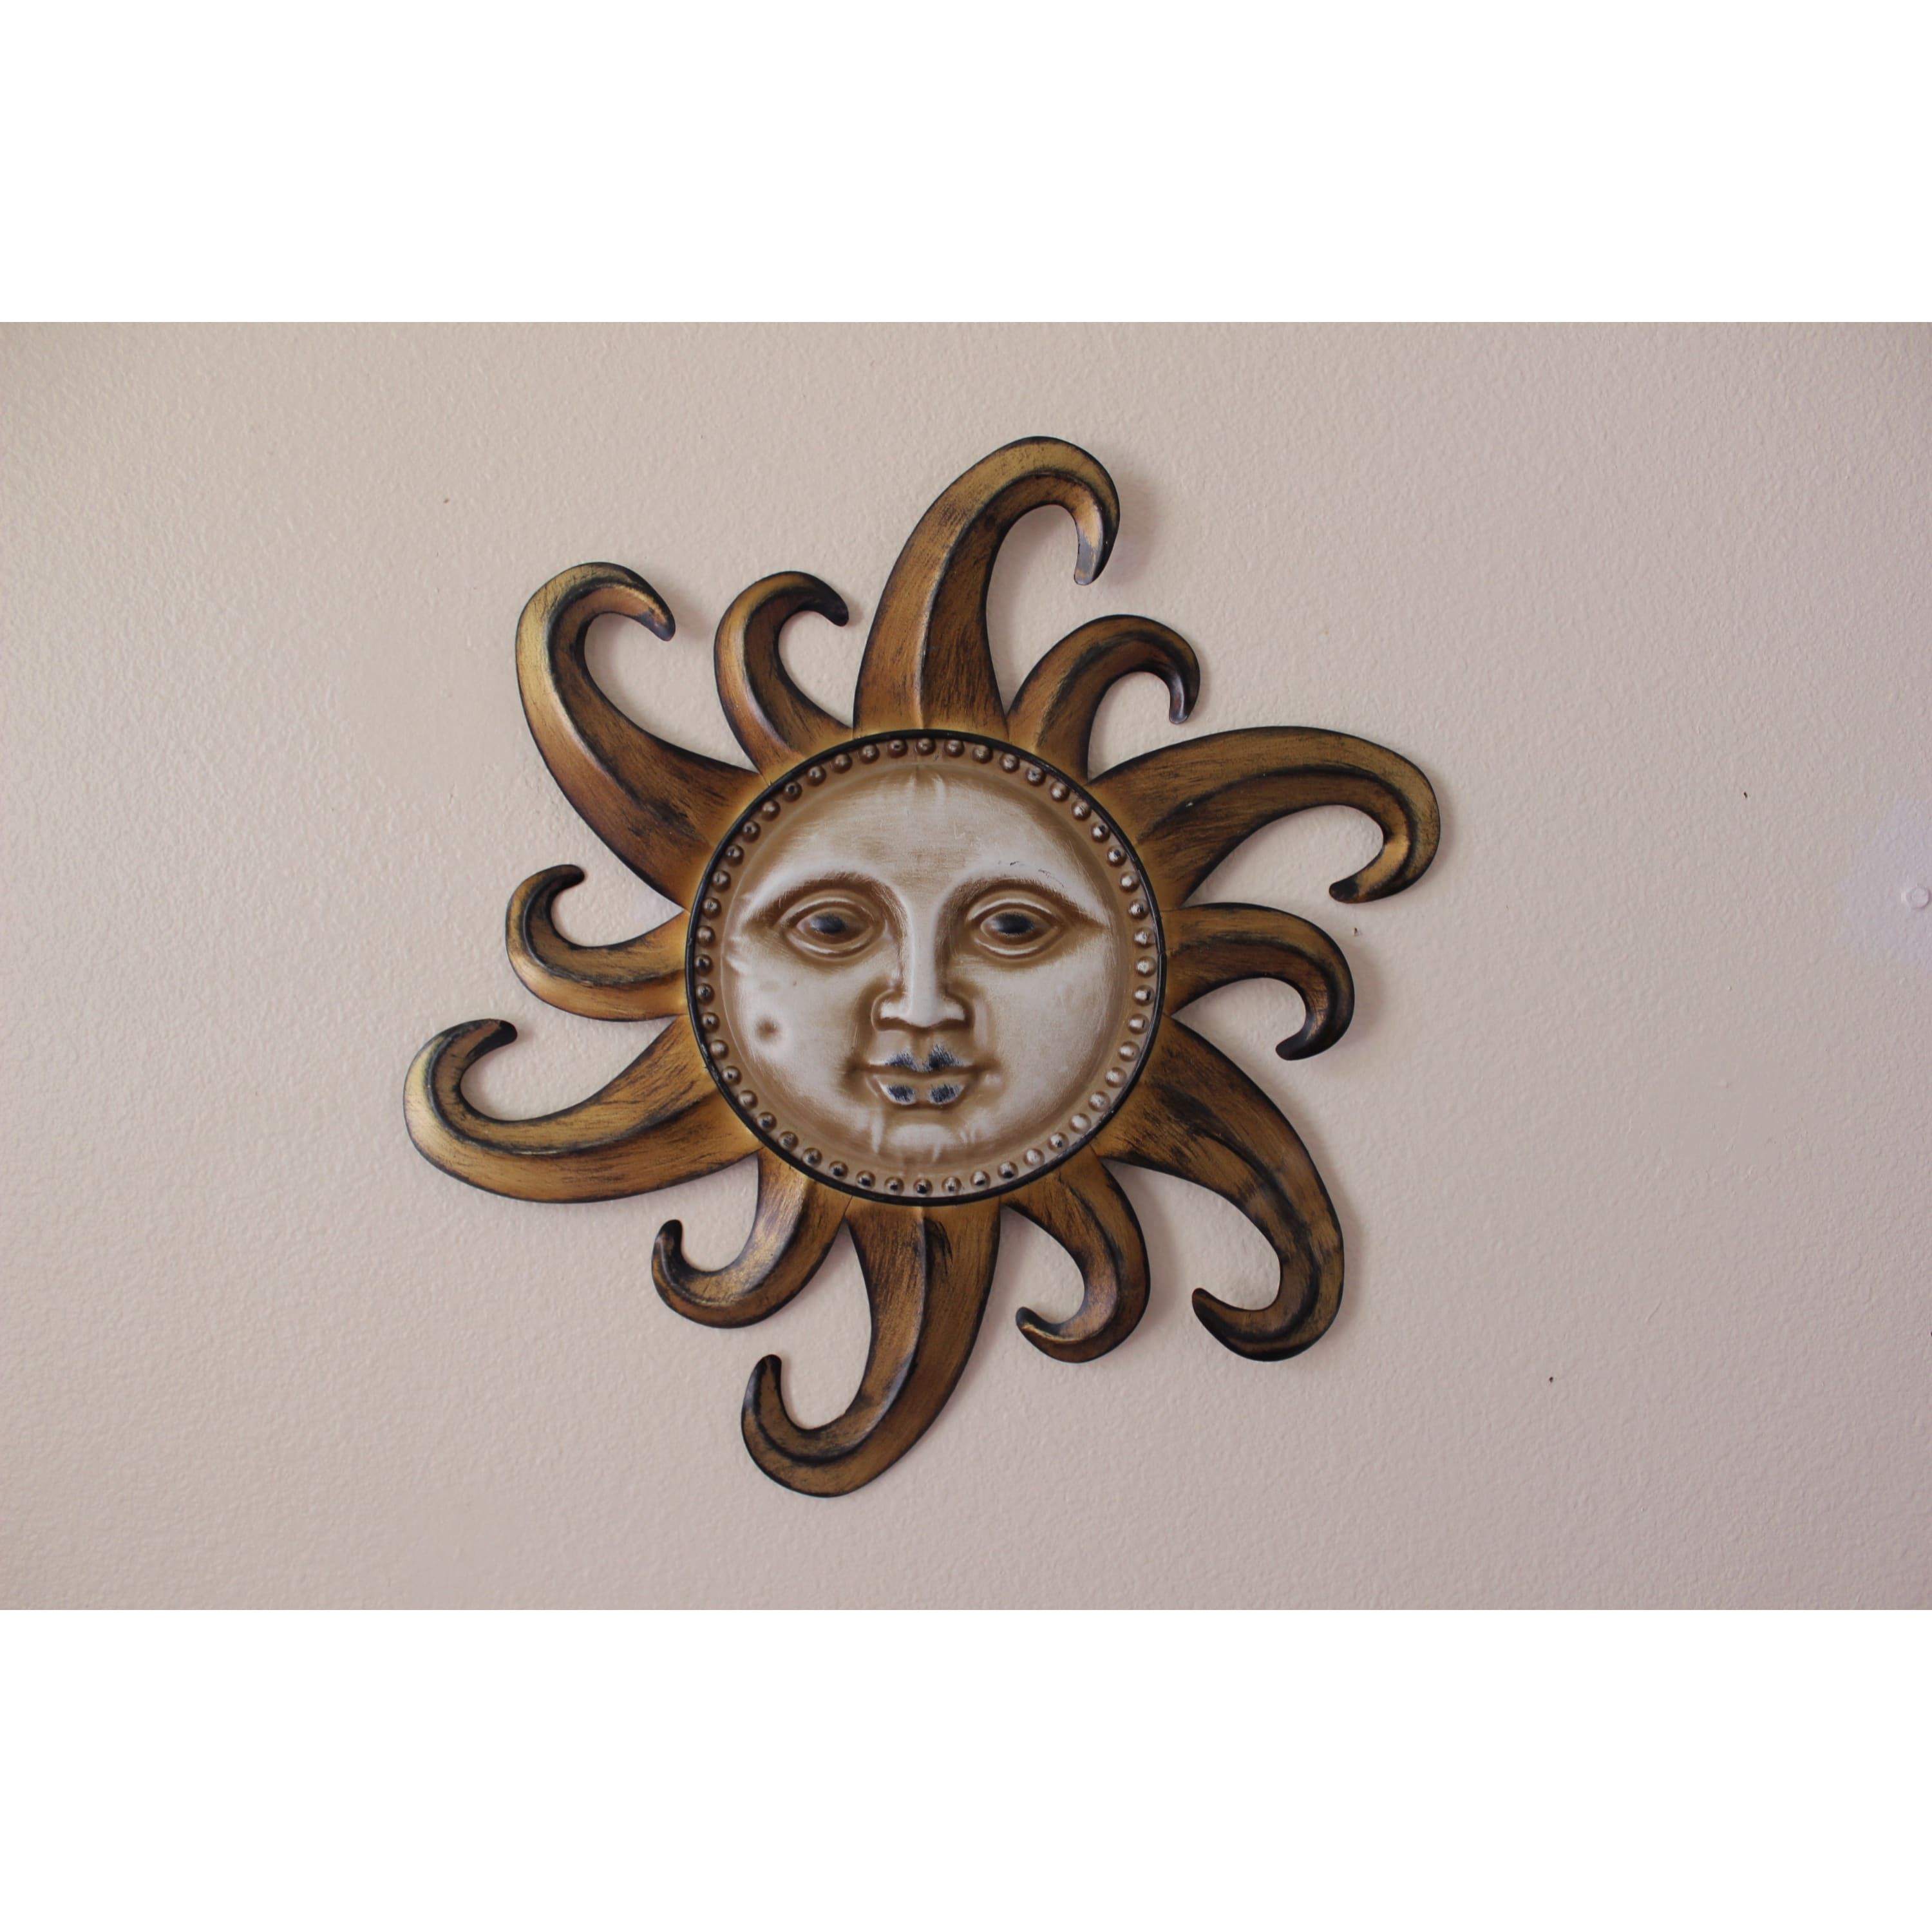 Sun Face, Sun Wall Hanging, Metal Wall Hanging, Patio Decor, Porch Decor |  Pink Horse Florida Intended For Most Popular Sun Face Metal Wall Art (View 16 of 20)